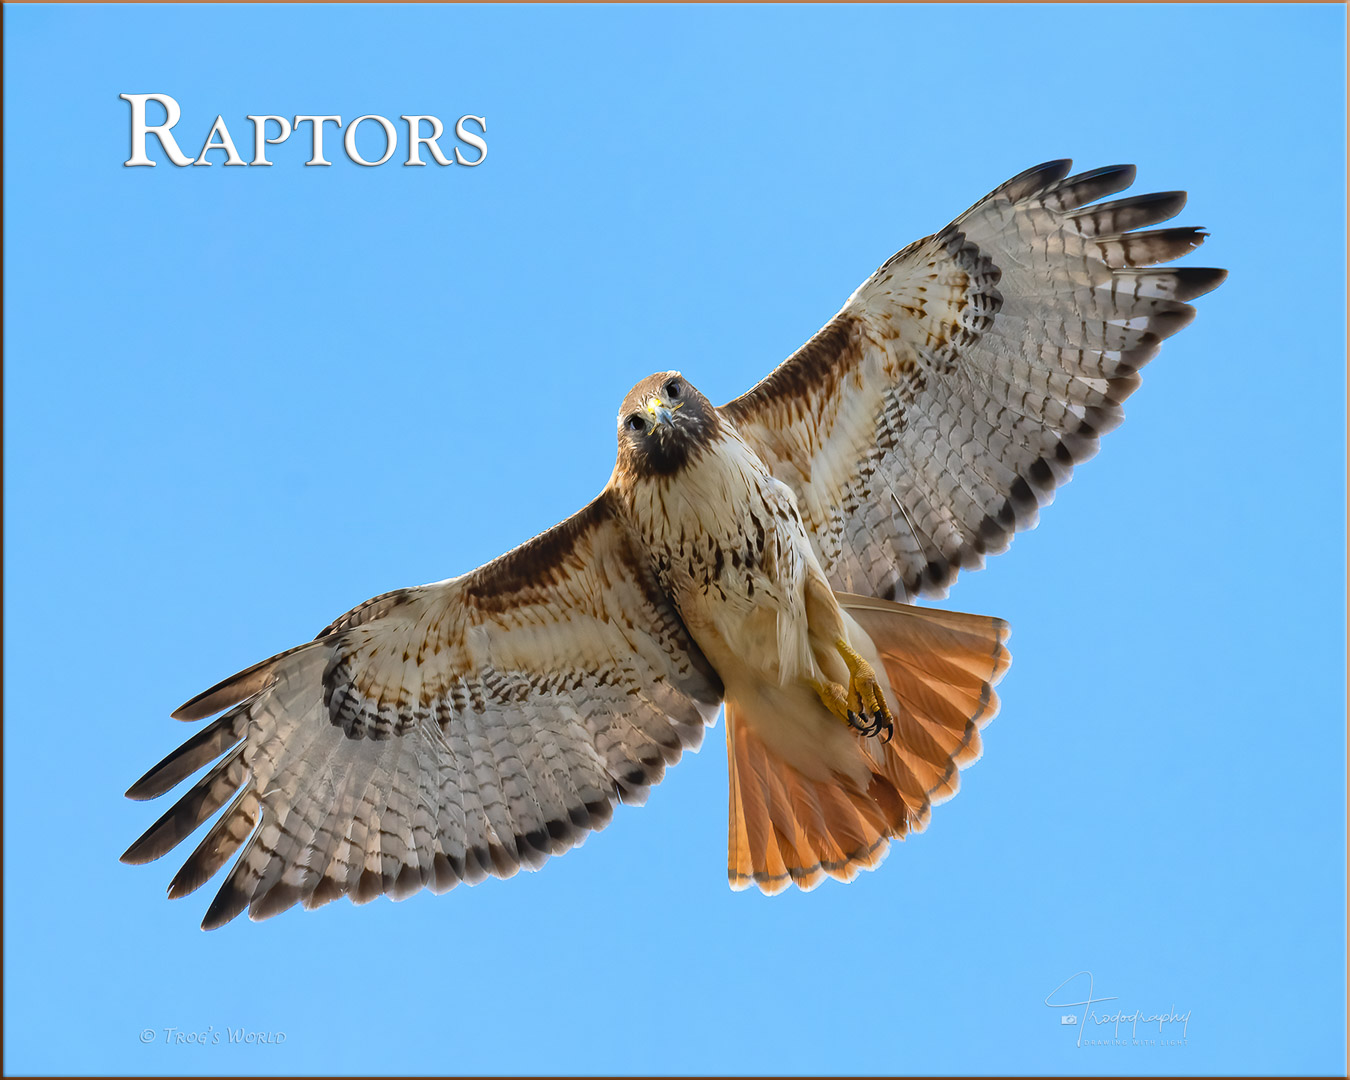 Red-tailed Hawk looks down while in flight